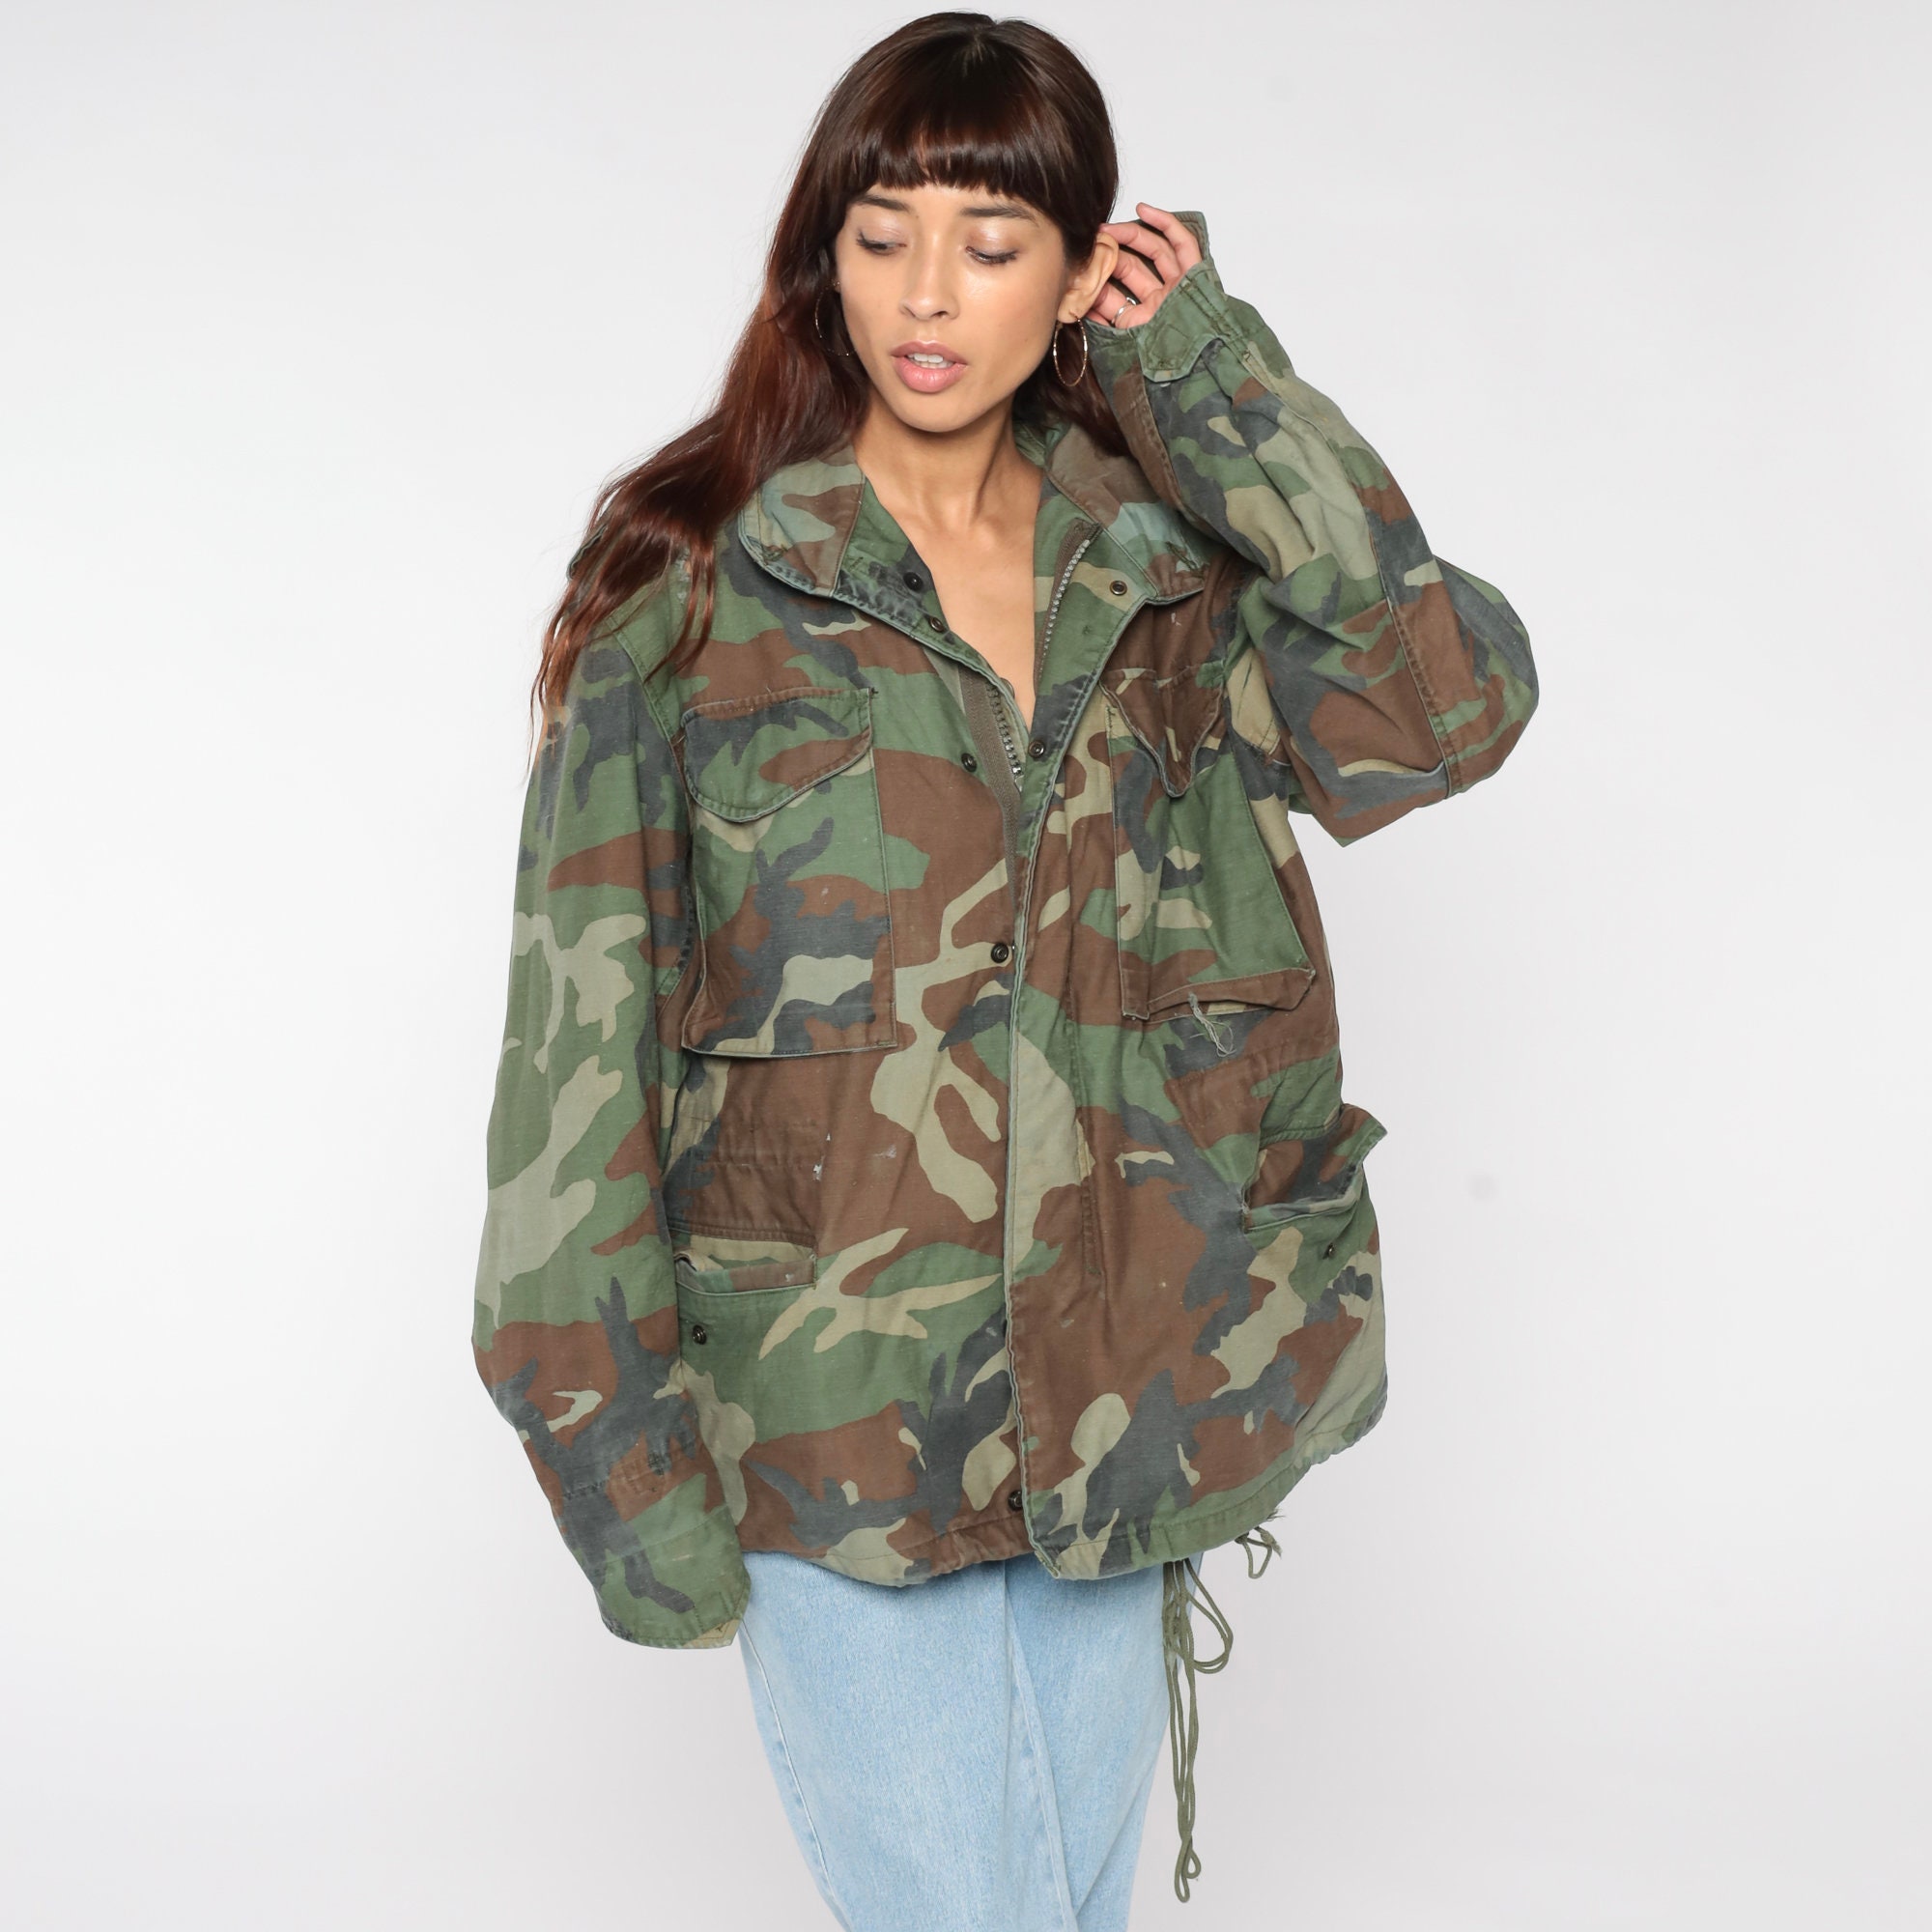 Camouflage Army Jacket CAMO Military Jacket Distressed Olive Drab Green ...